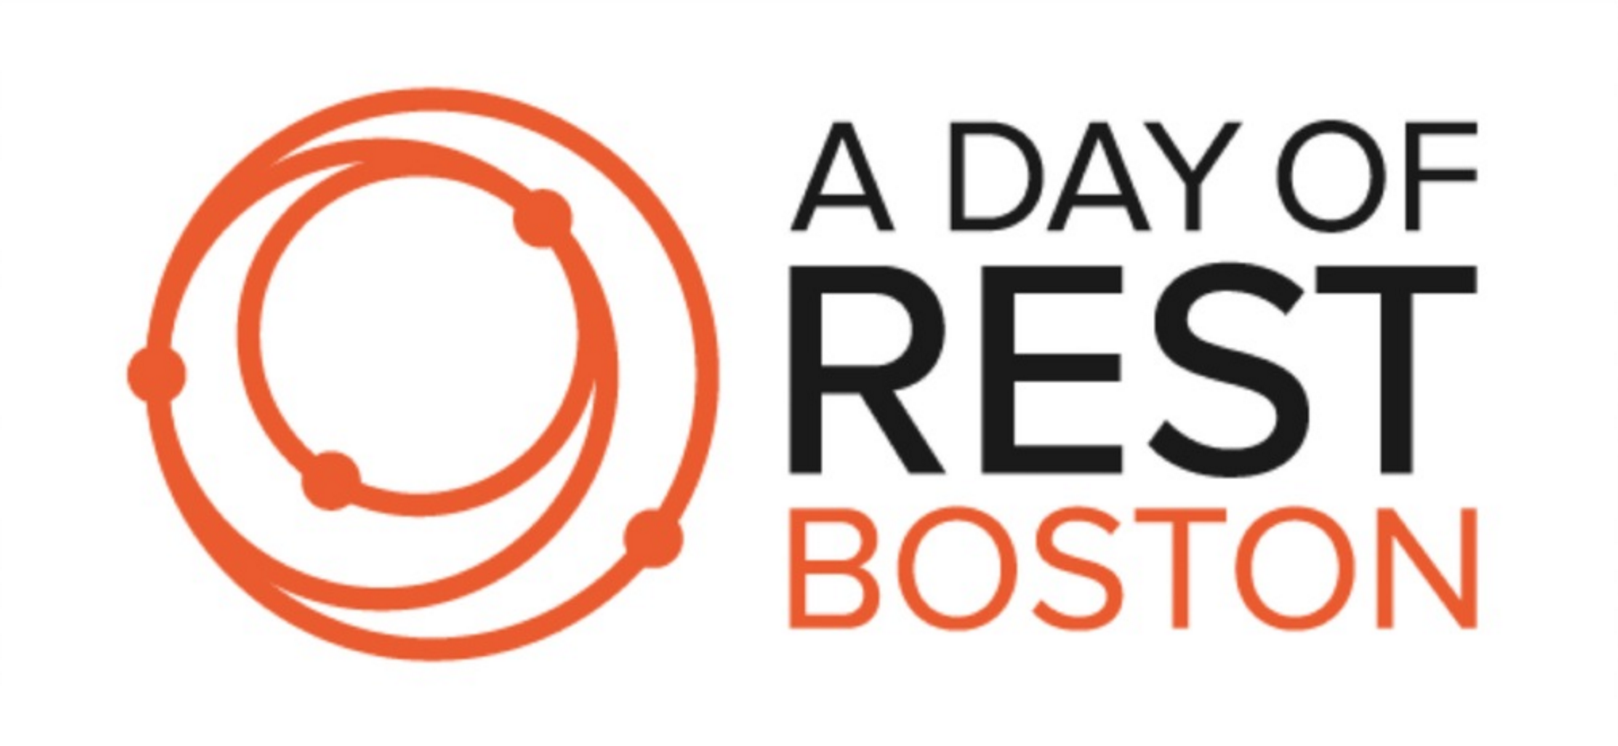 A Day of REST is Coming to Boston on October 28, 2016